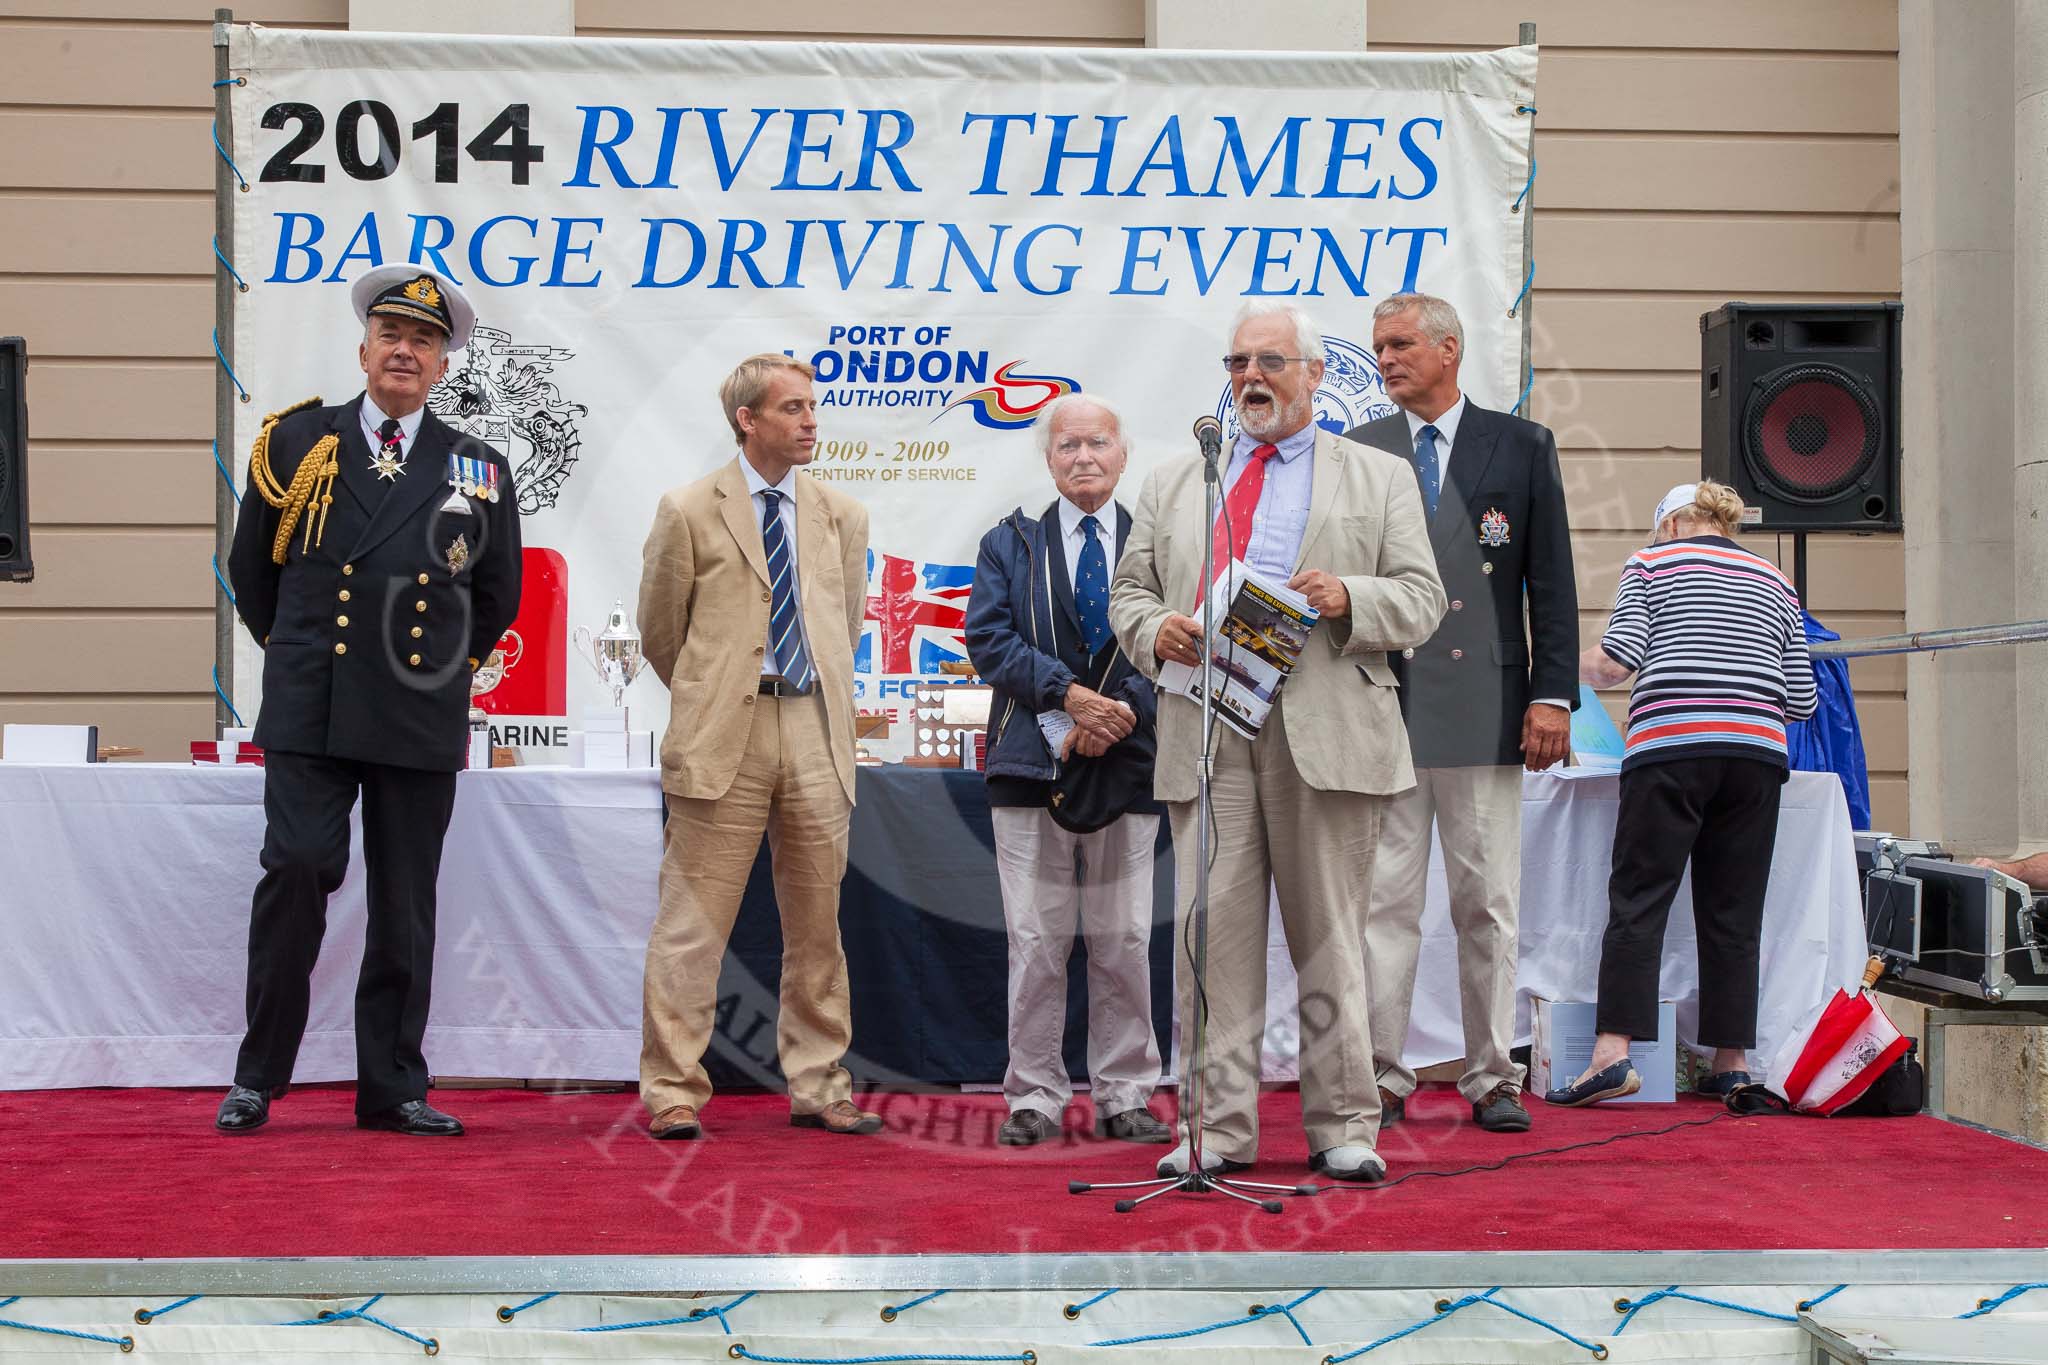 TOW River Thames Barge Driving Race 2014: From left to right: Admiral Lord West, PLA CEO Robin Mortimer, Prof Alan Lee Williams OBE, Tony Parker, Jeremy Randall, and Ann Robinson..
River Thames between Greenwich and Westminster,
London,

United Kingdom,
on 28 June 2014 at 16:30, image #460